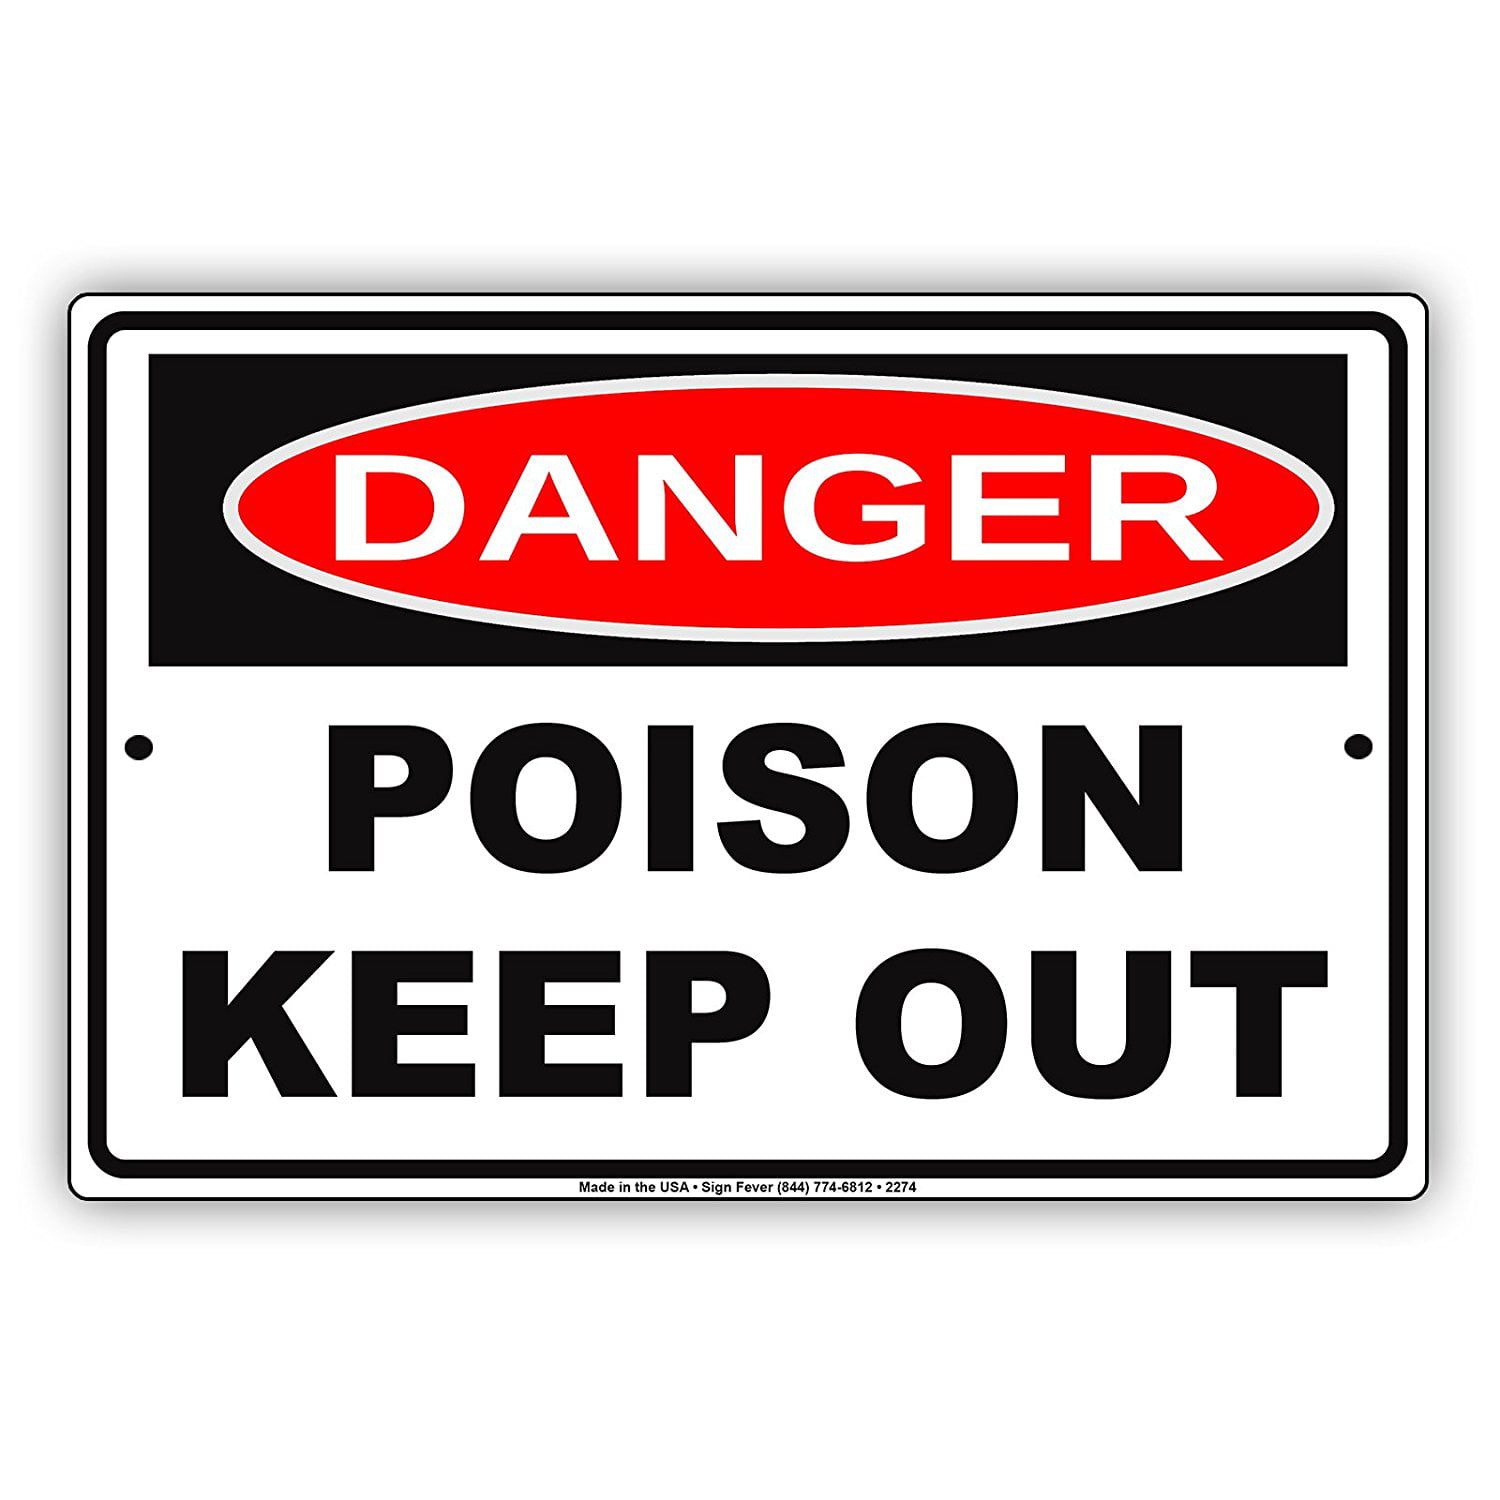 Danger Keep Out Fumigating With Poison Gas Aluminum Metal Sign